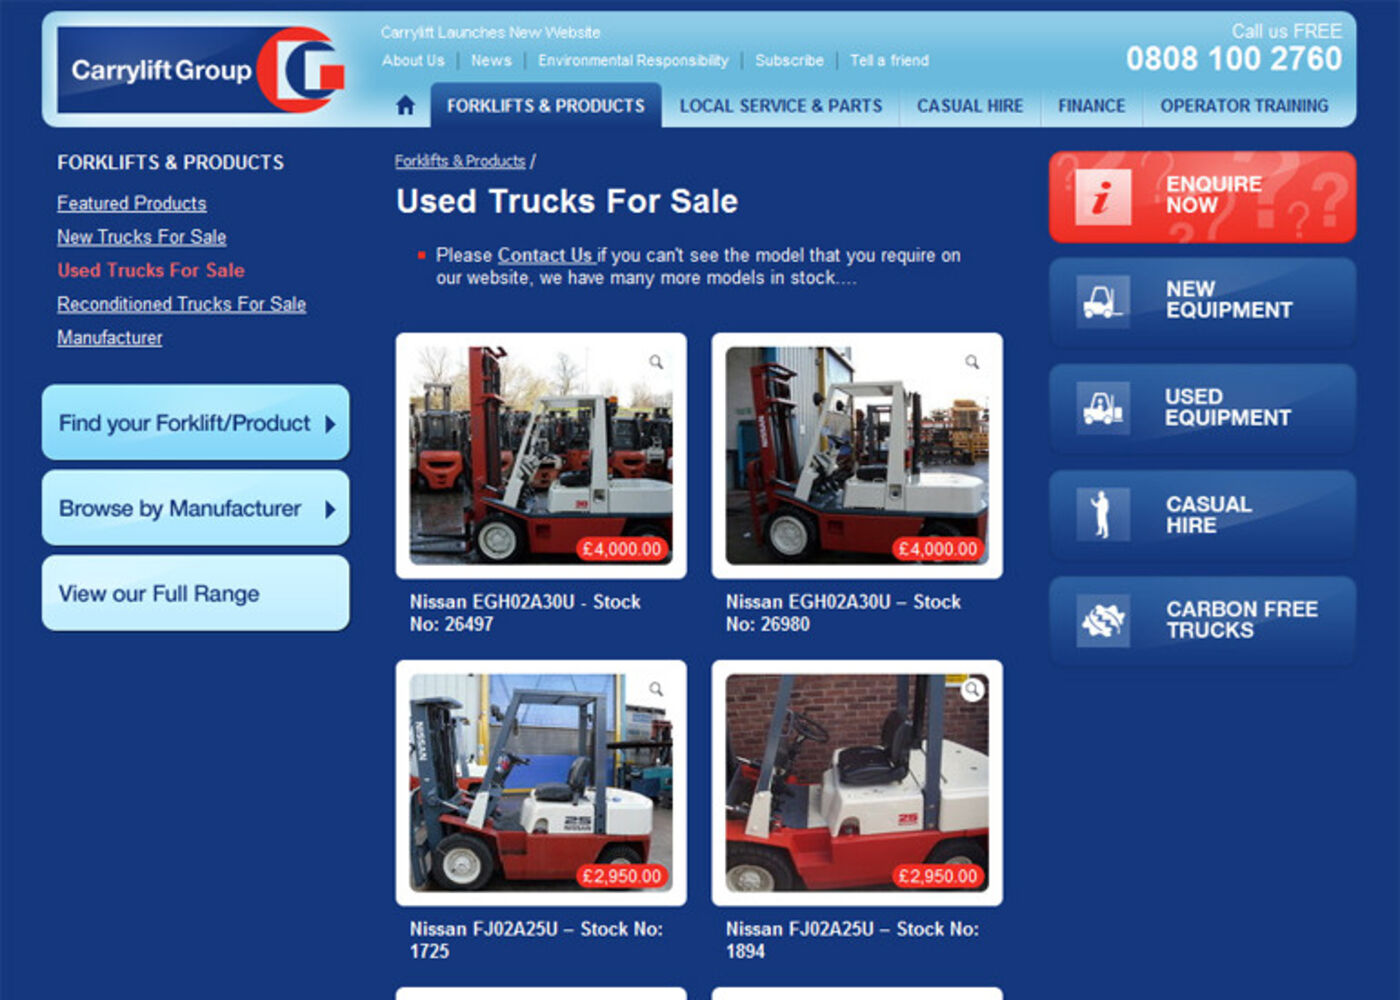 The Carrylift Group (2006) Products page